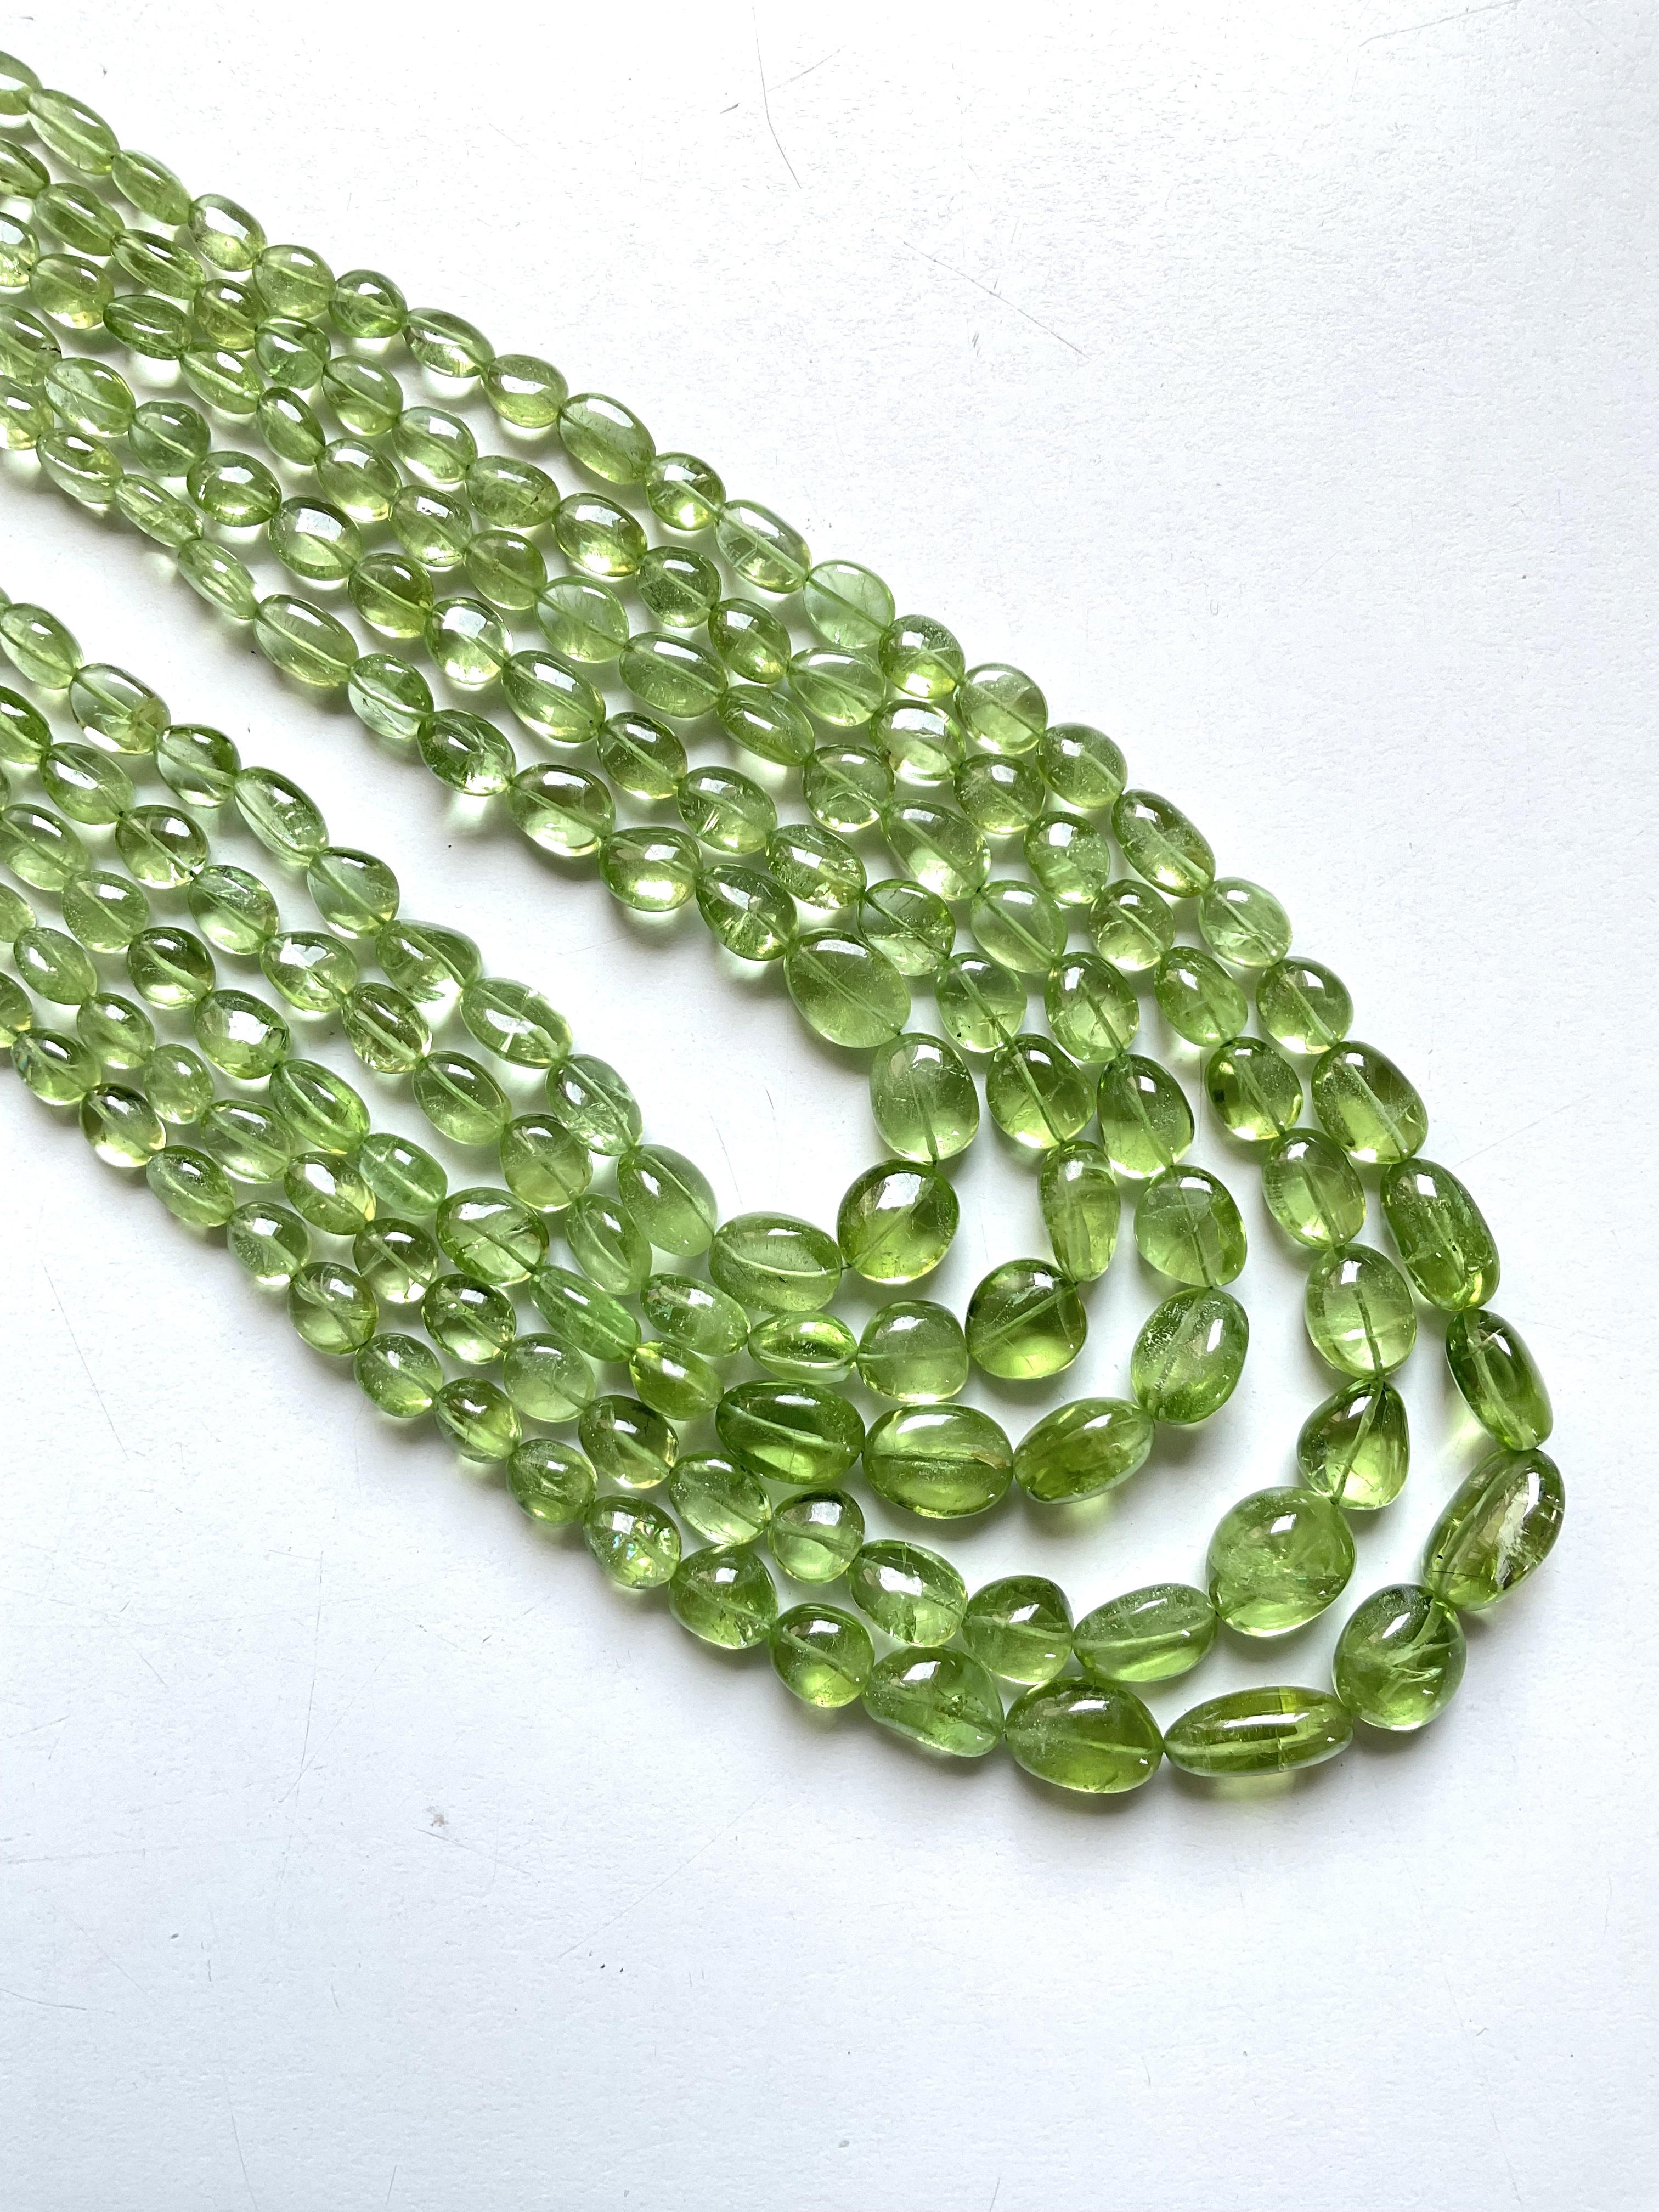 839.05 carats apple green peridot top quality plain tumbled natural necklace gem For Sale 3